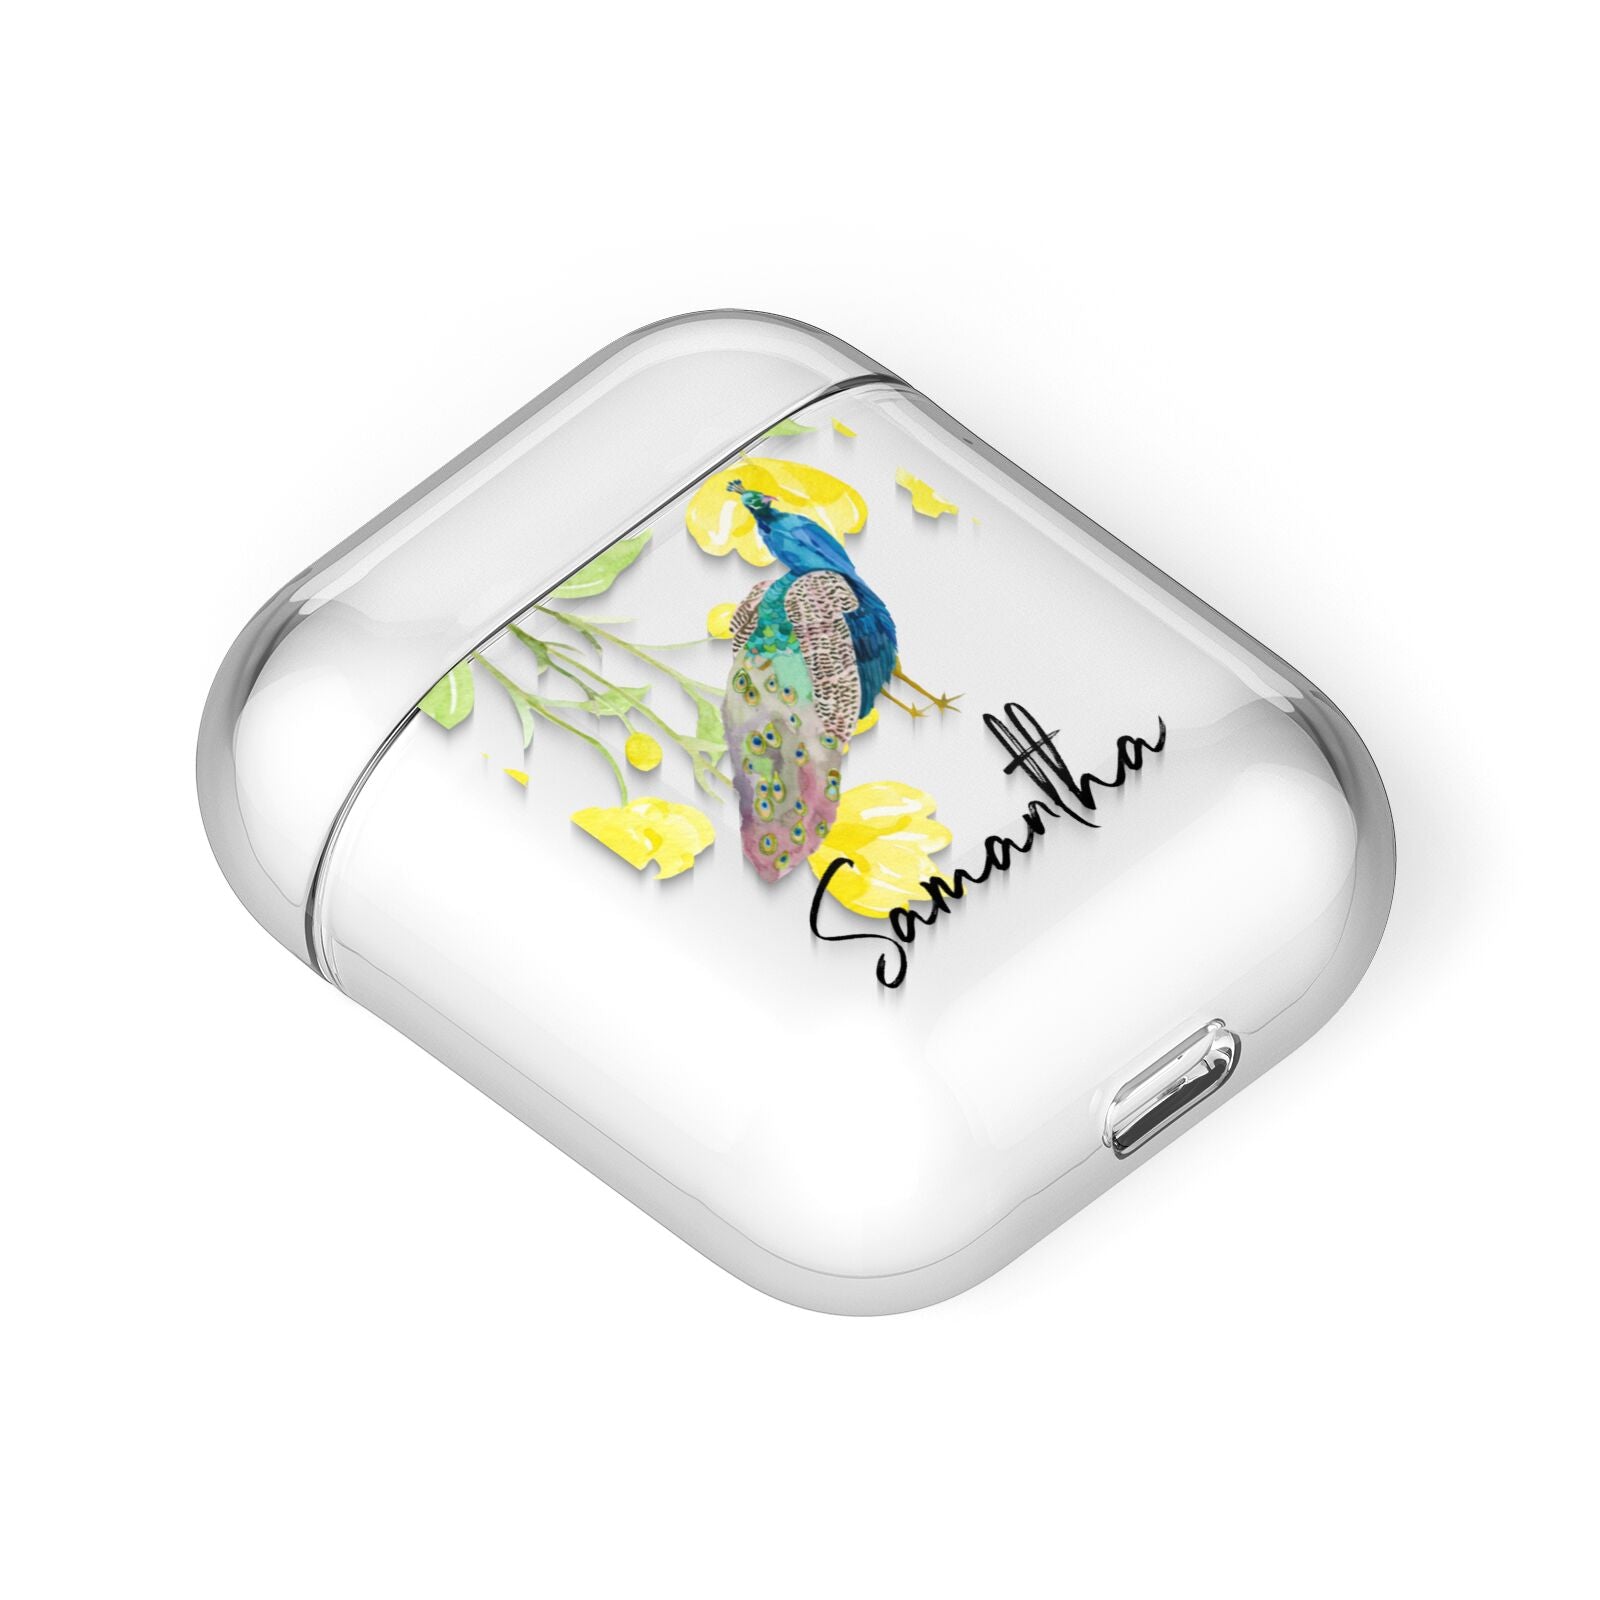 Personalised Peacock AirPods Case Laid Flat